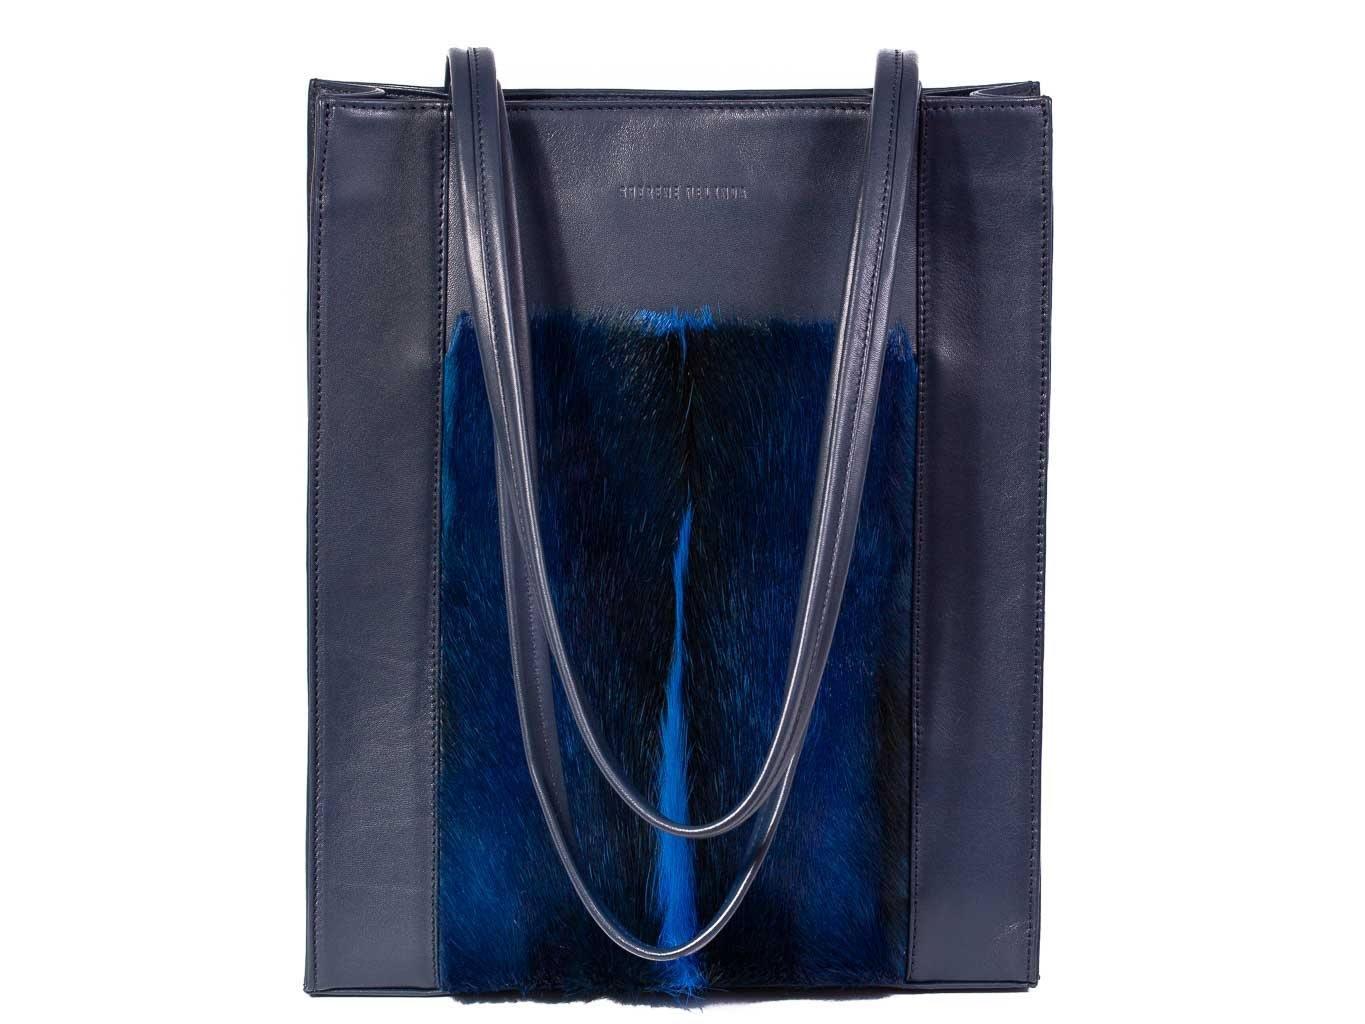 Tote Springbok Handbag in Navy Blue with a fan feature by Sherene Melinda front handle